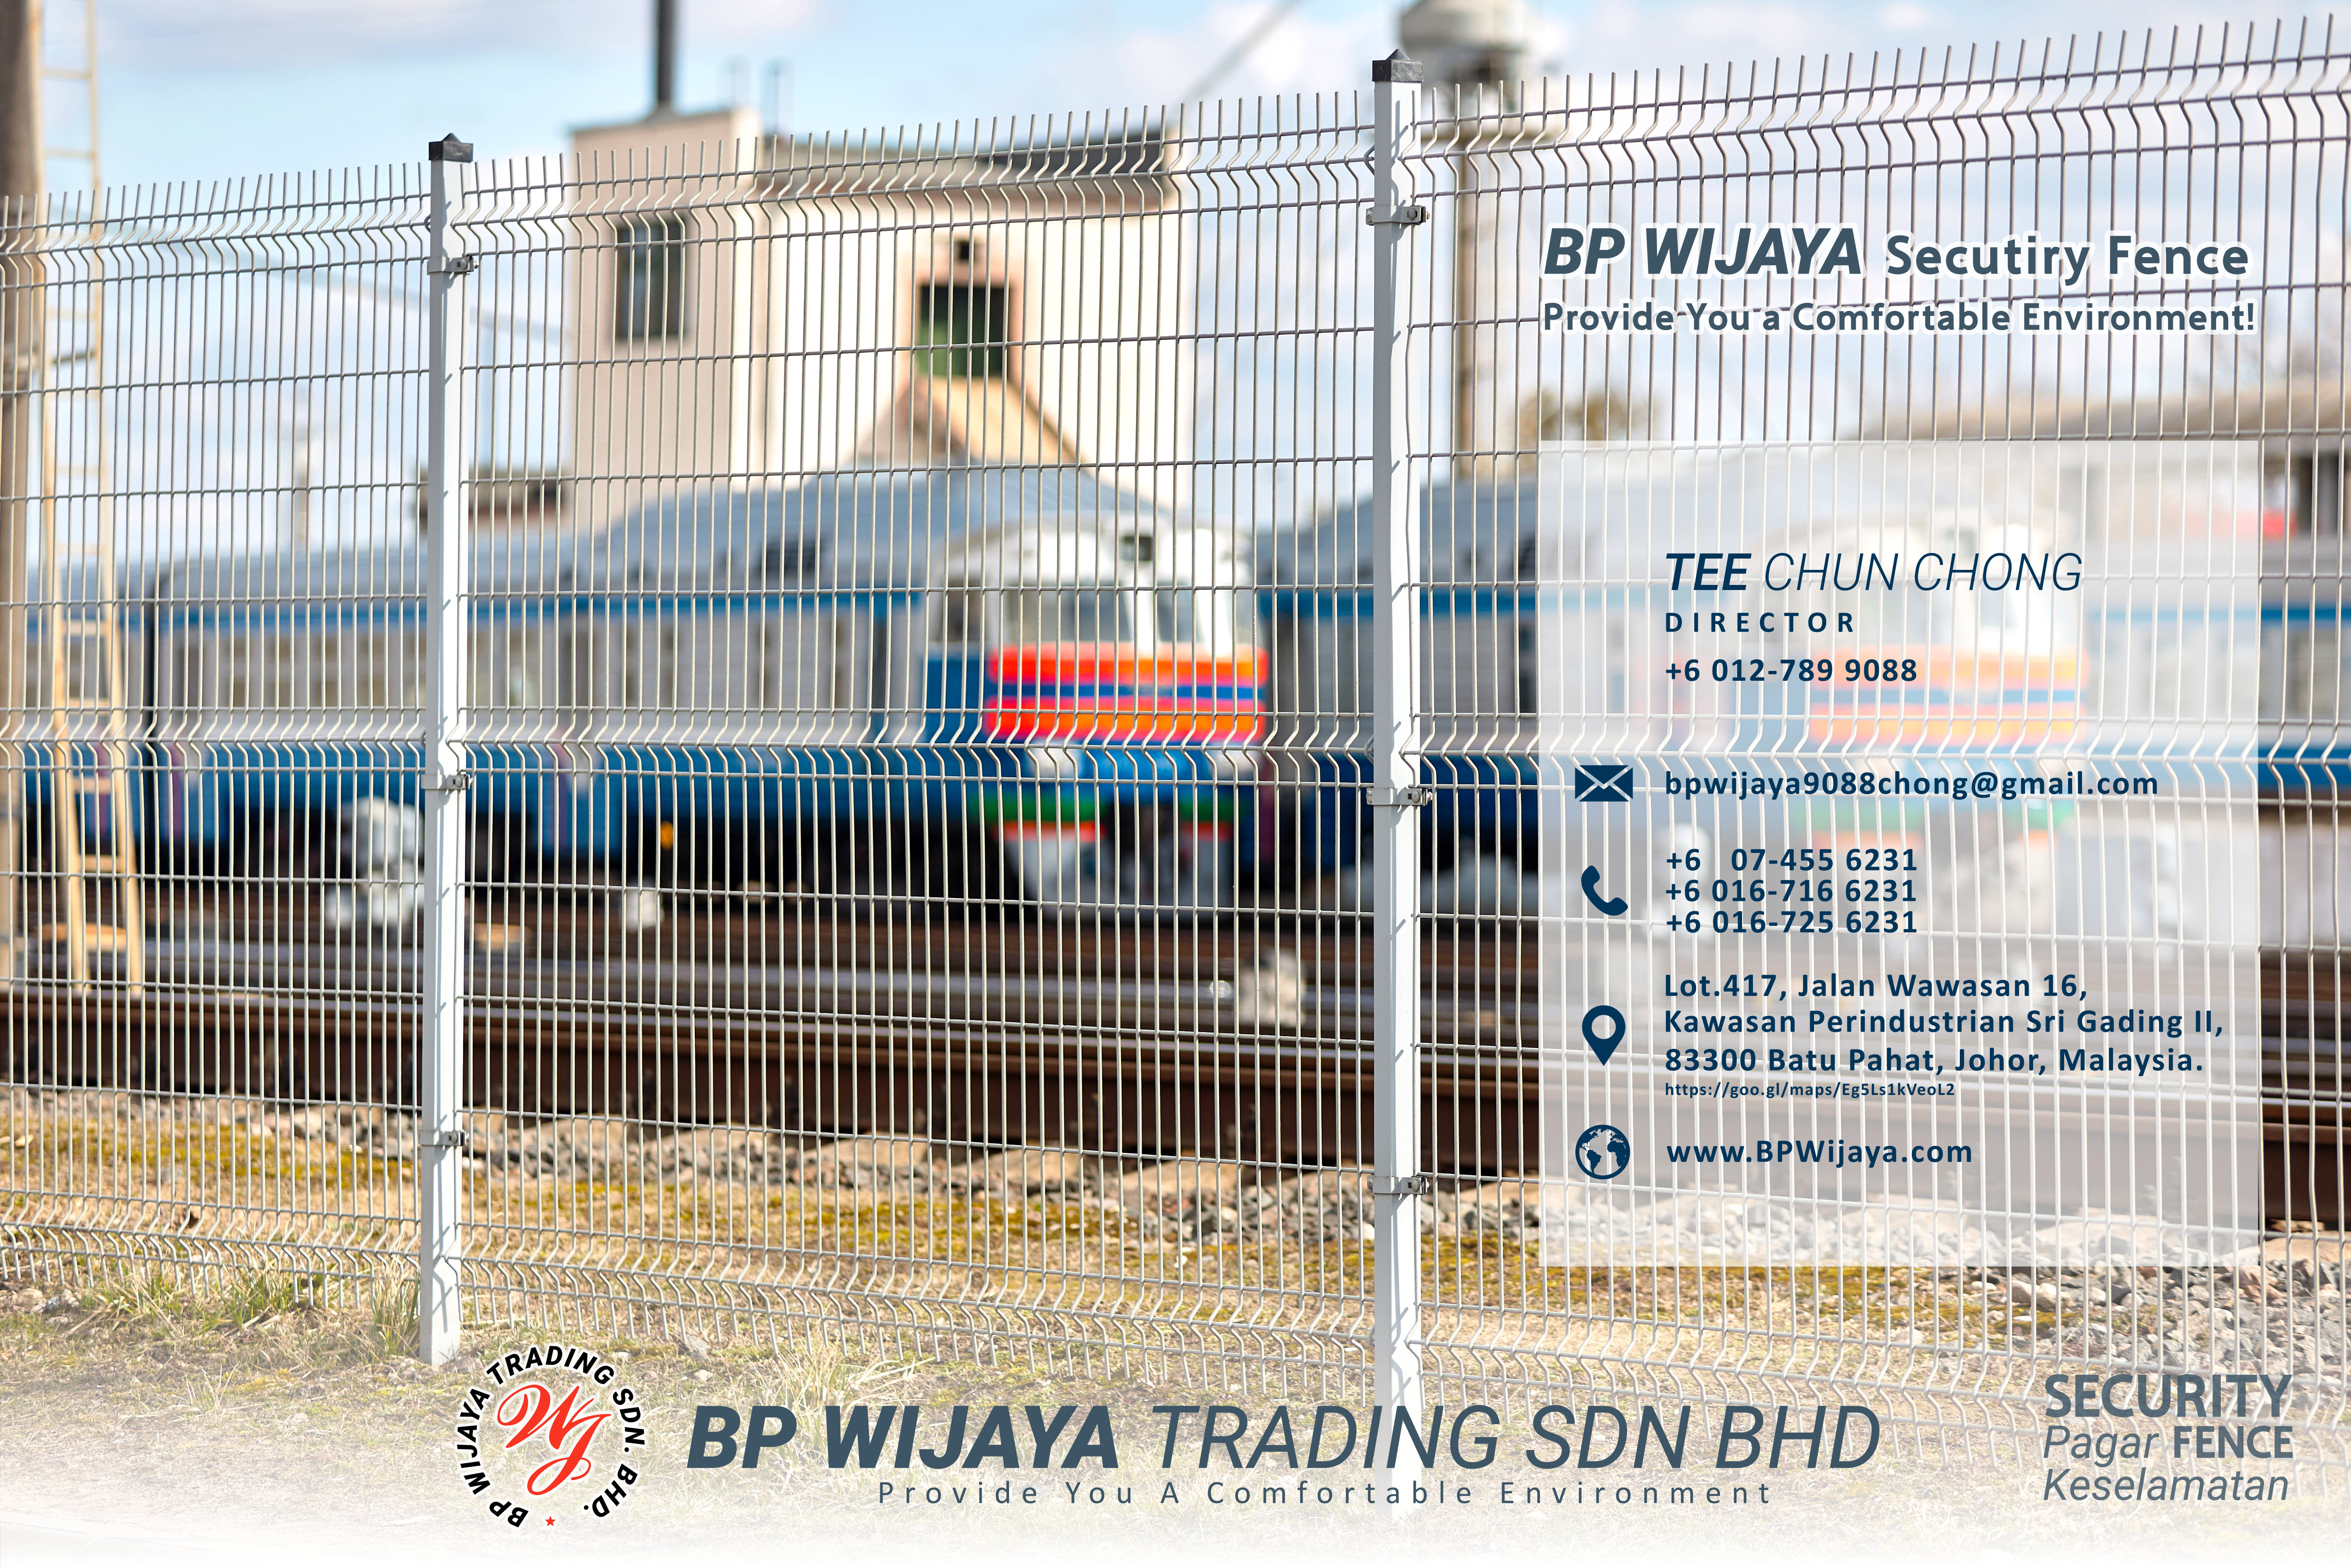 BP Wijaya Trading Sdn Bhd Fence Malaysia Selangor Kuala Lumpur manufacturer of safety fences building materials for housing construction site Security fencing factory fence house fence A01-019